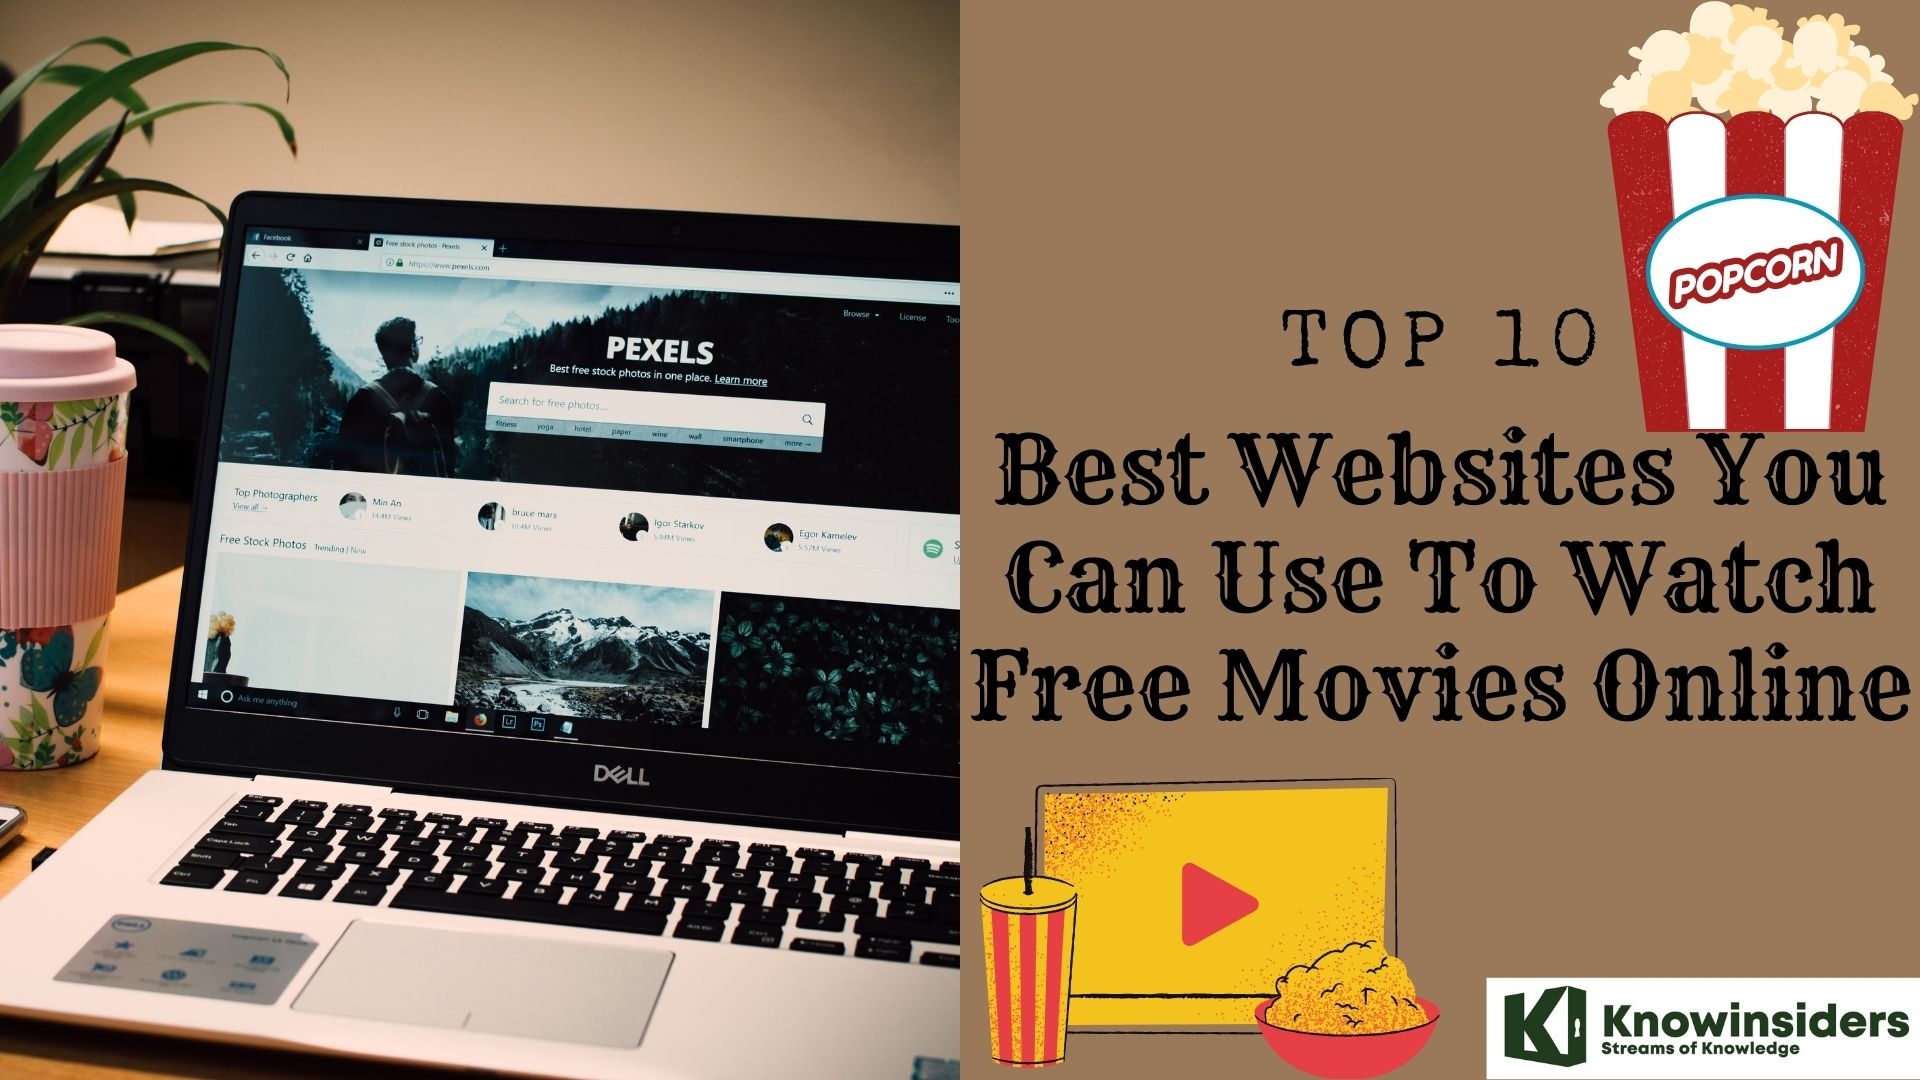 Top 10 Best Free Sites To Watch Movies Online KnowInsiders